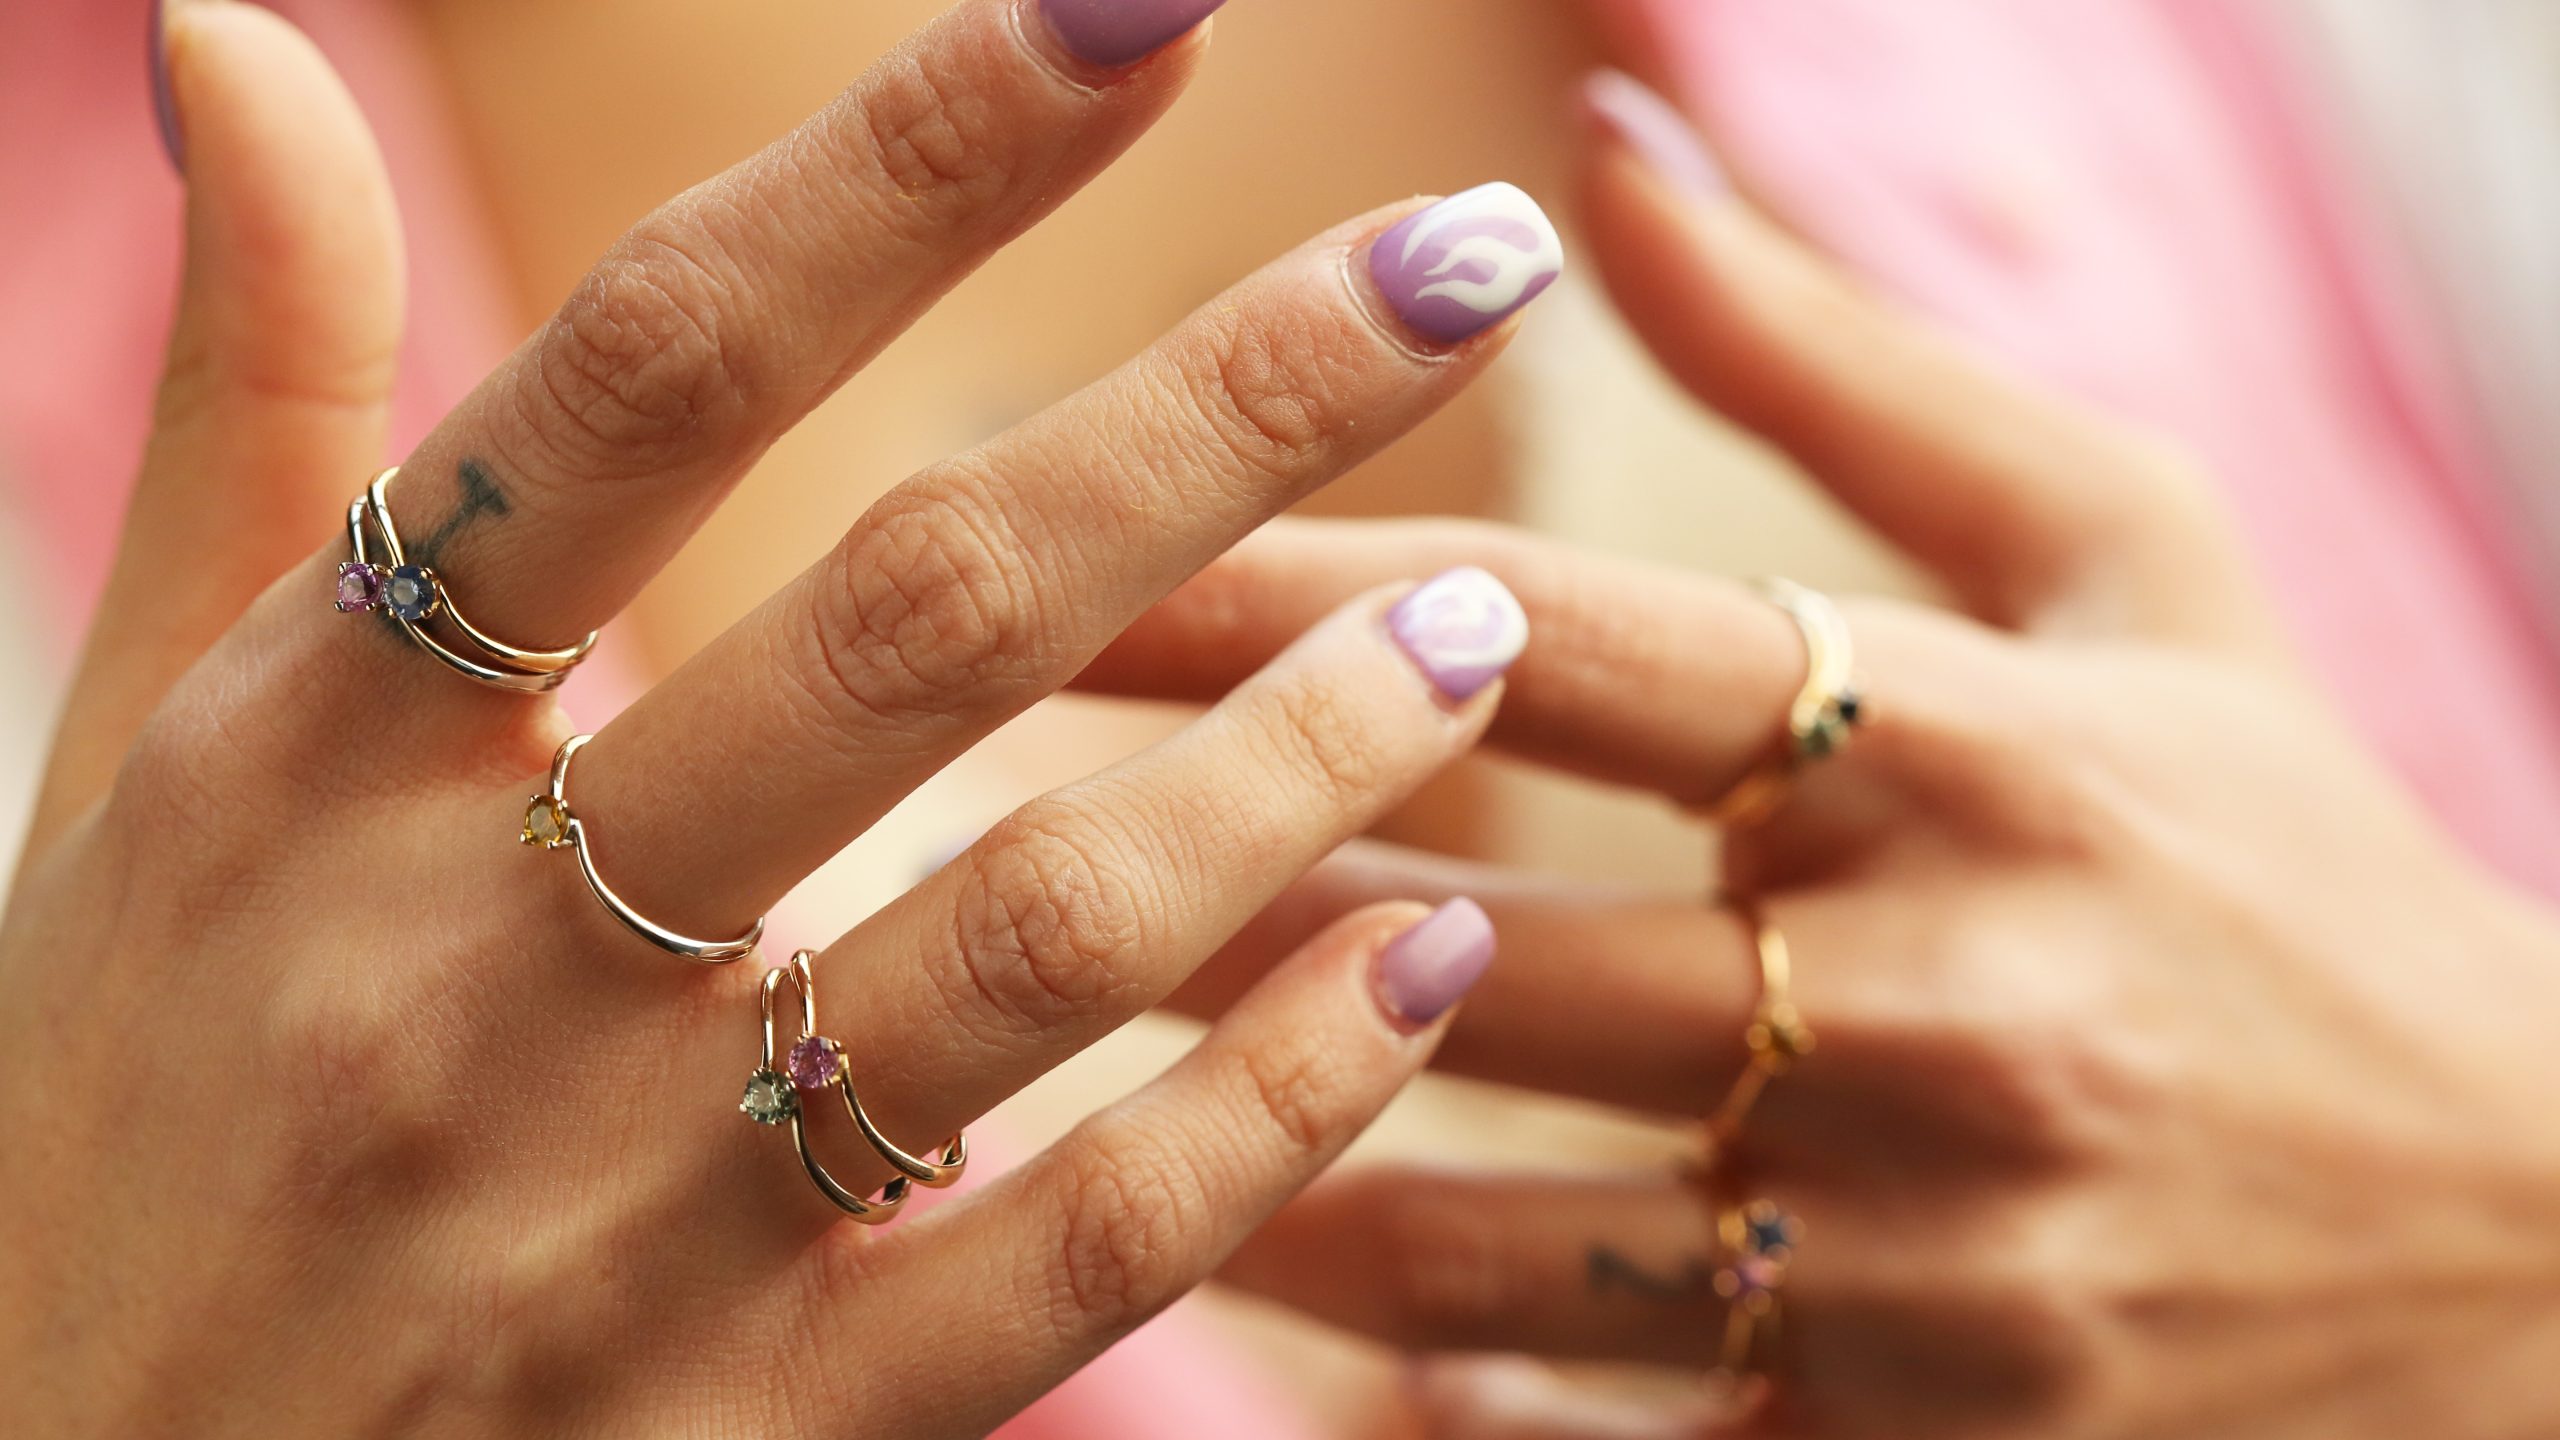 Is it bad to wear a ring on your middle finger? - Quora